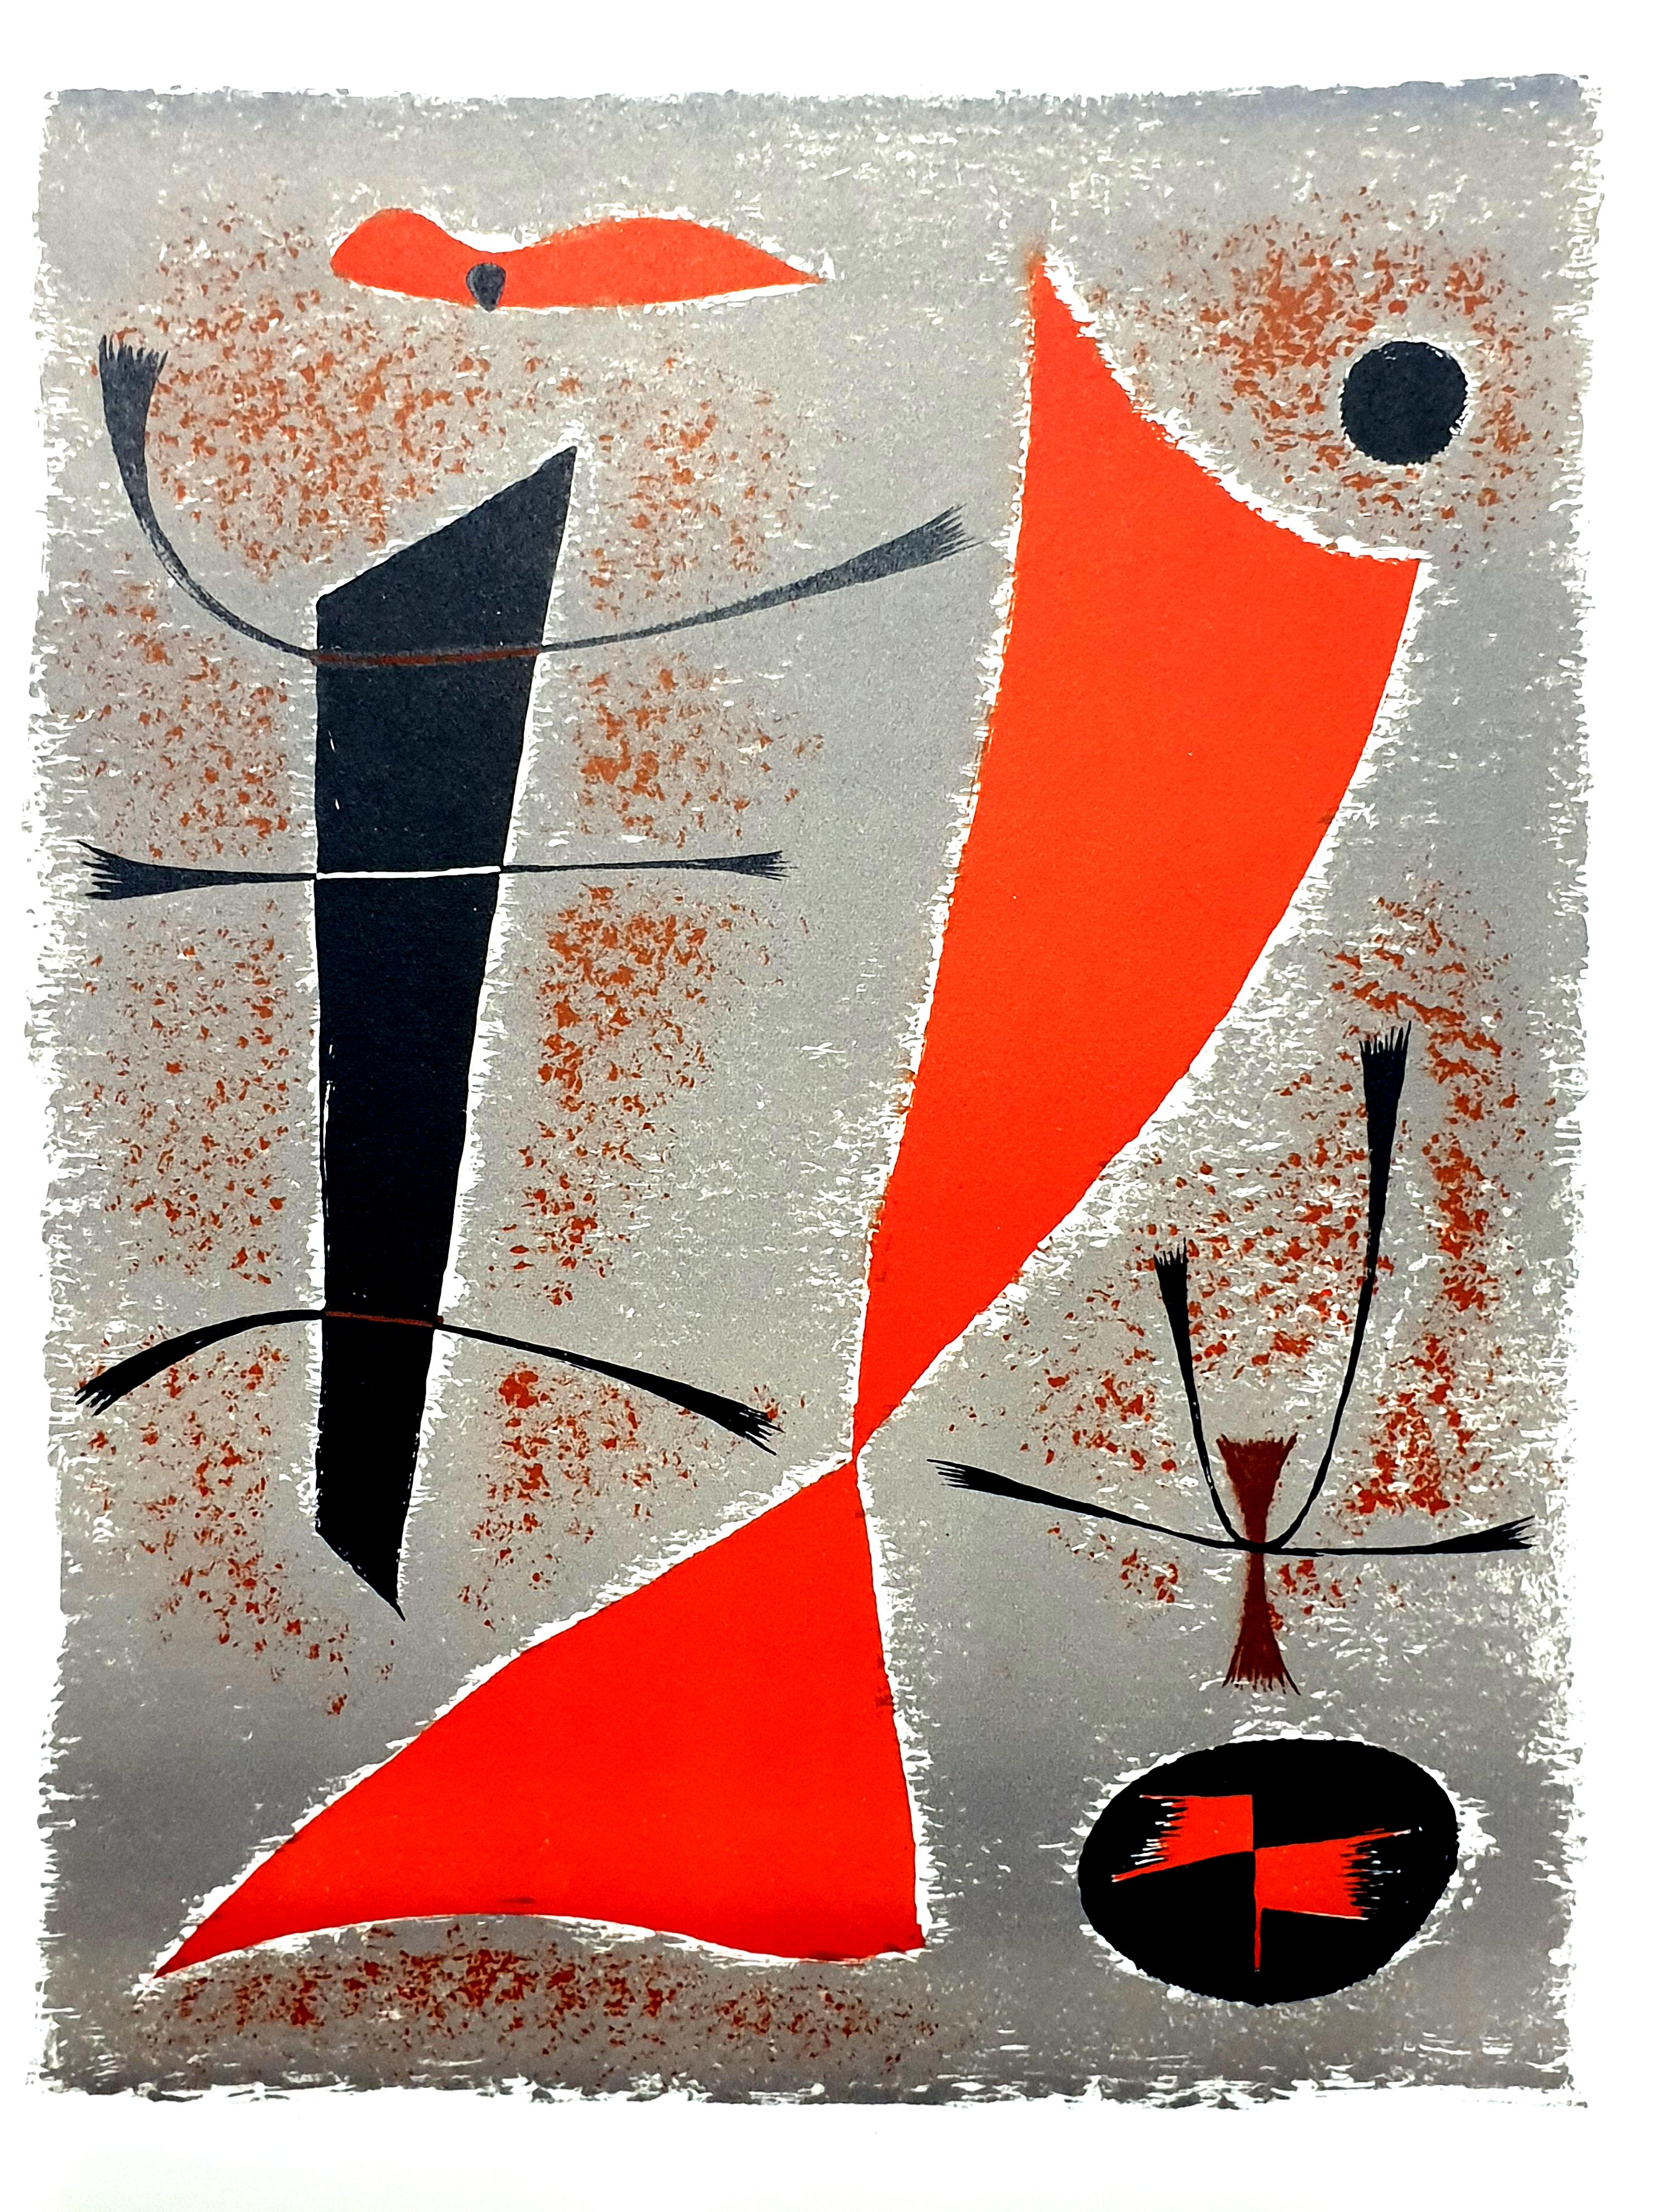 Gustave Singier - Abstract Fish - Original Lithograph